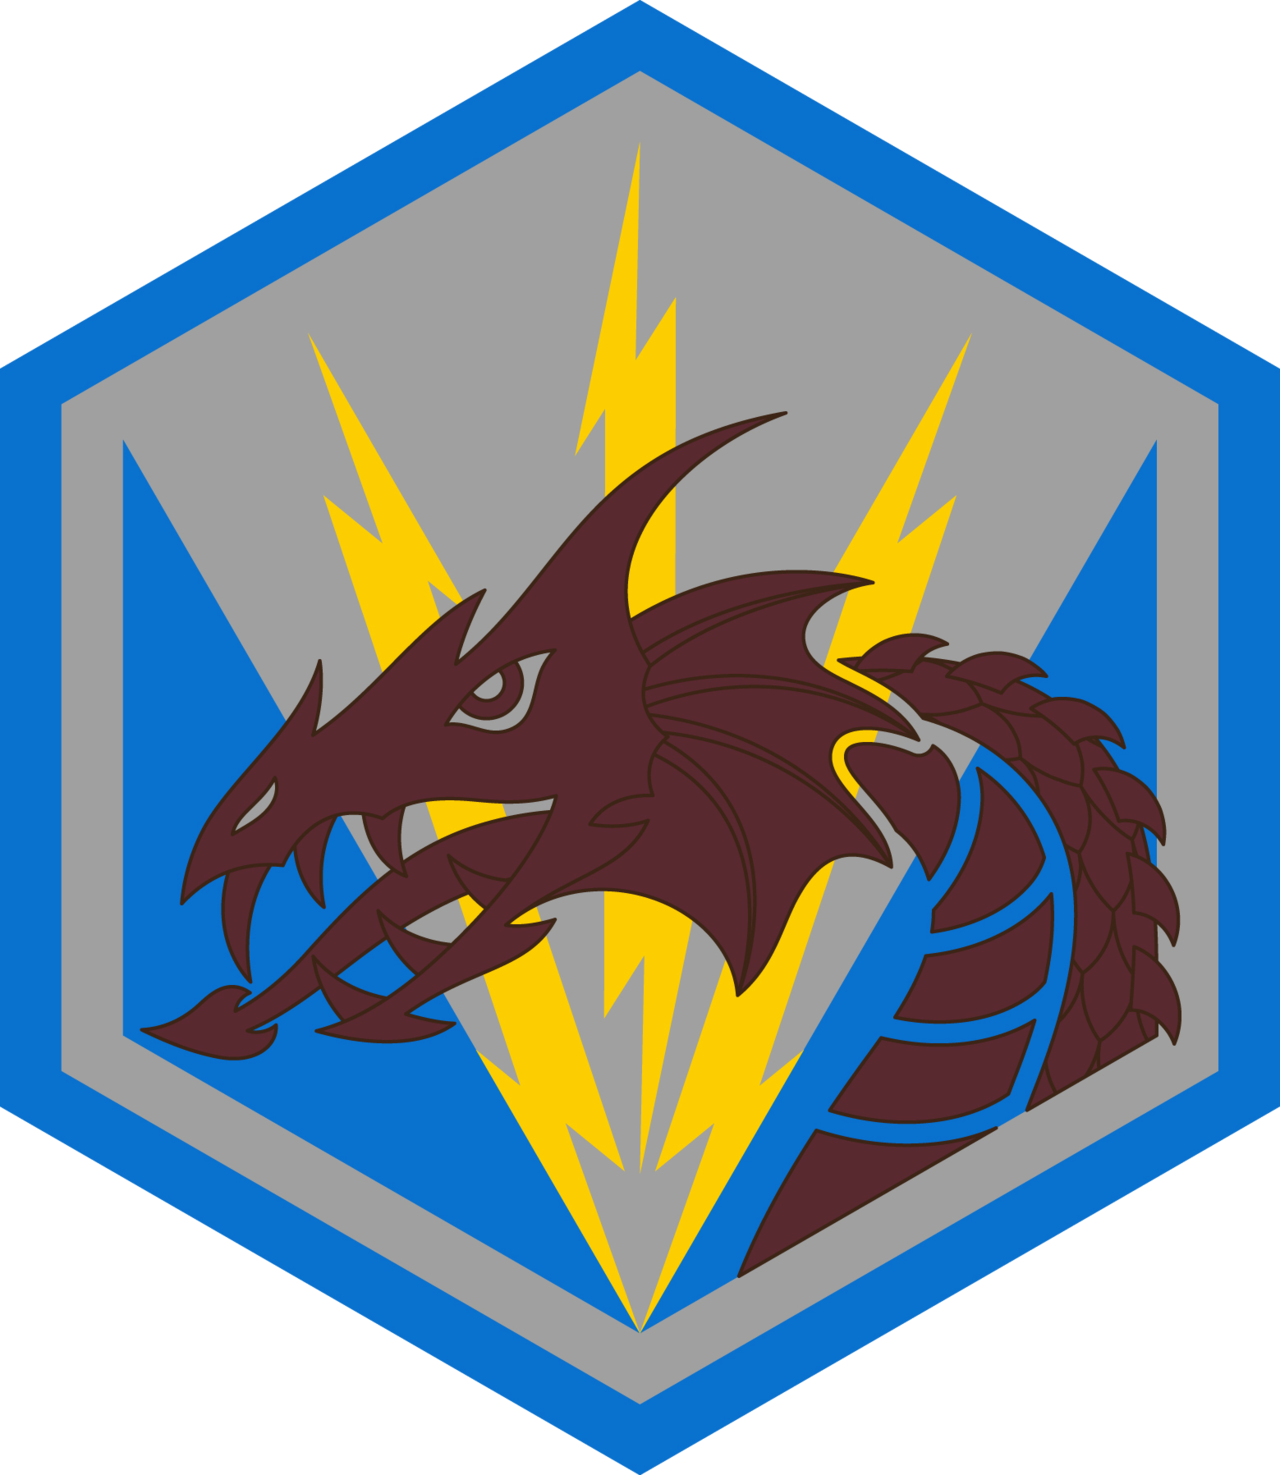 Military Intelligence Corps - 336th Military Intelligence Brigade (1280x1475)